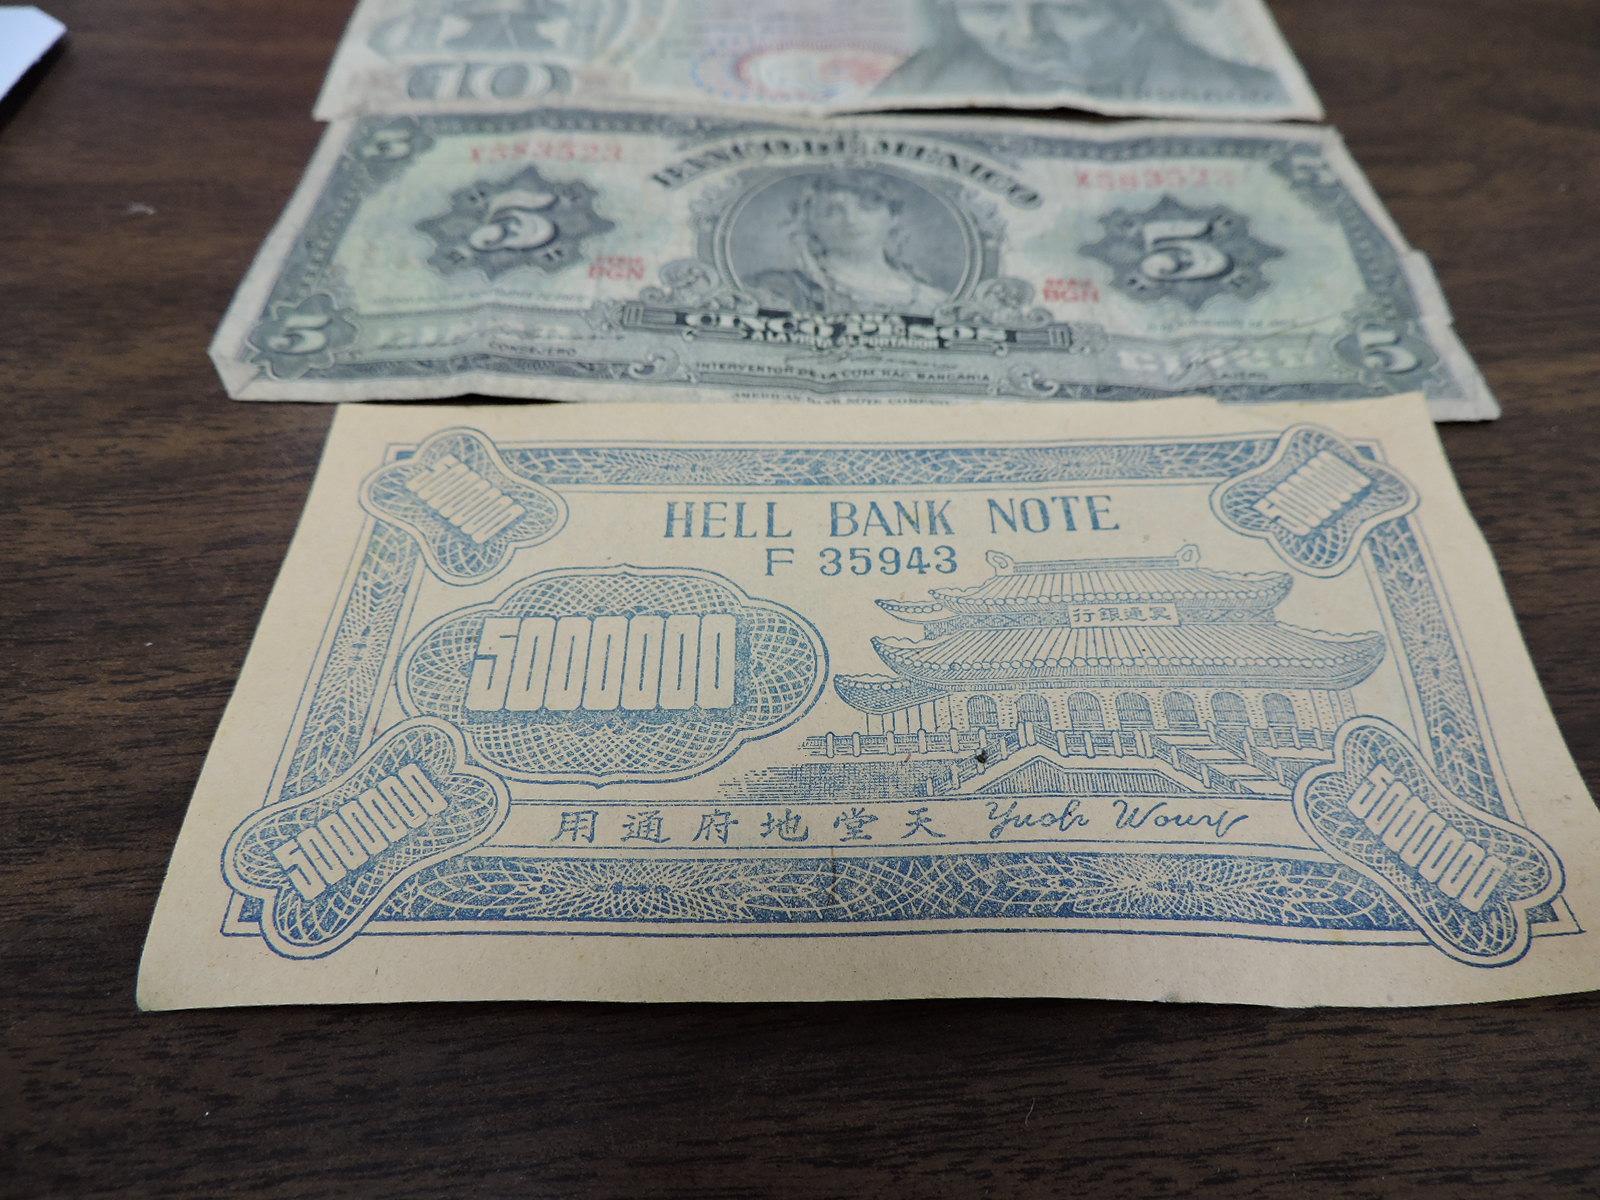 3 Mexican Peso Bills and One Chinese 500,000 Hell Bank Note Bill